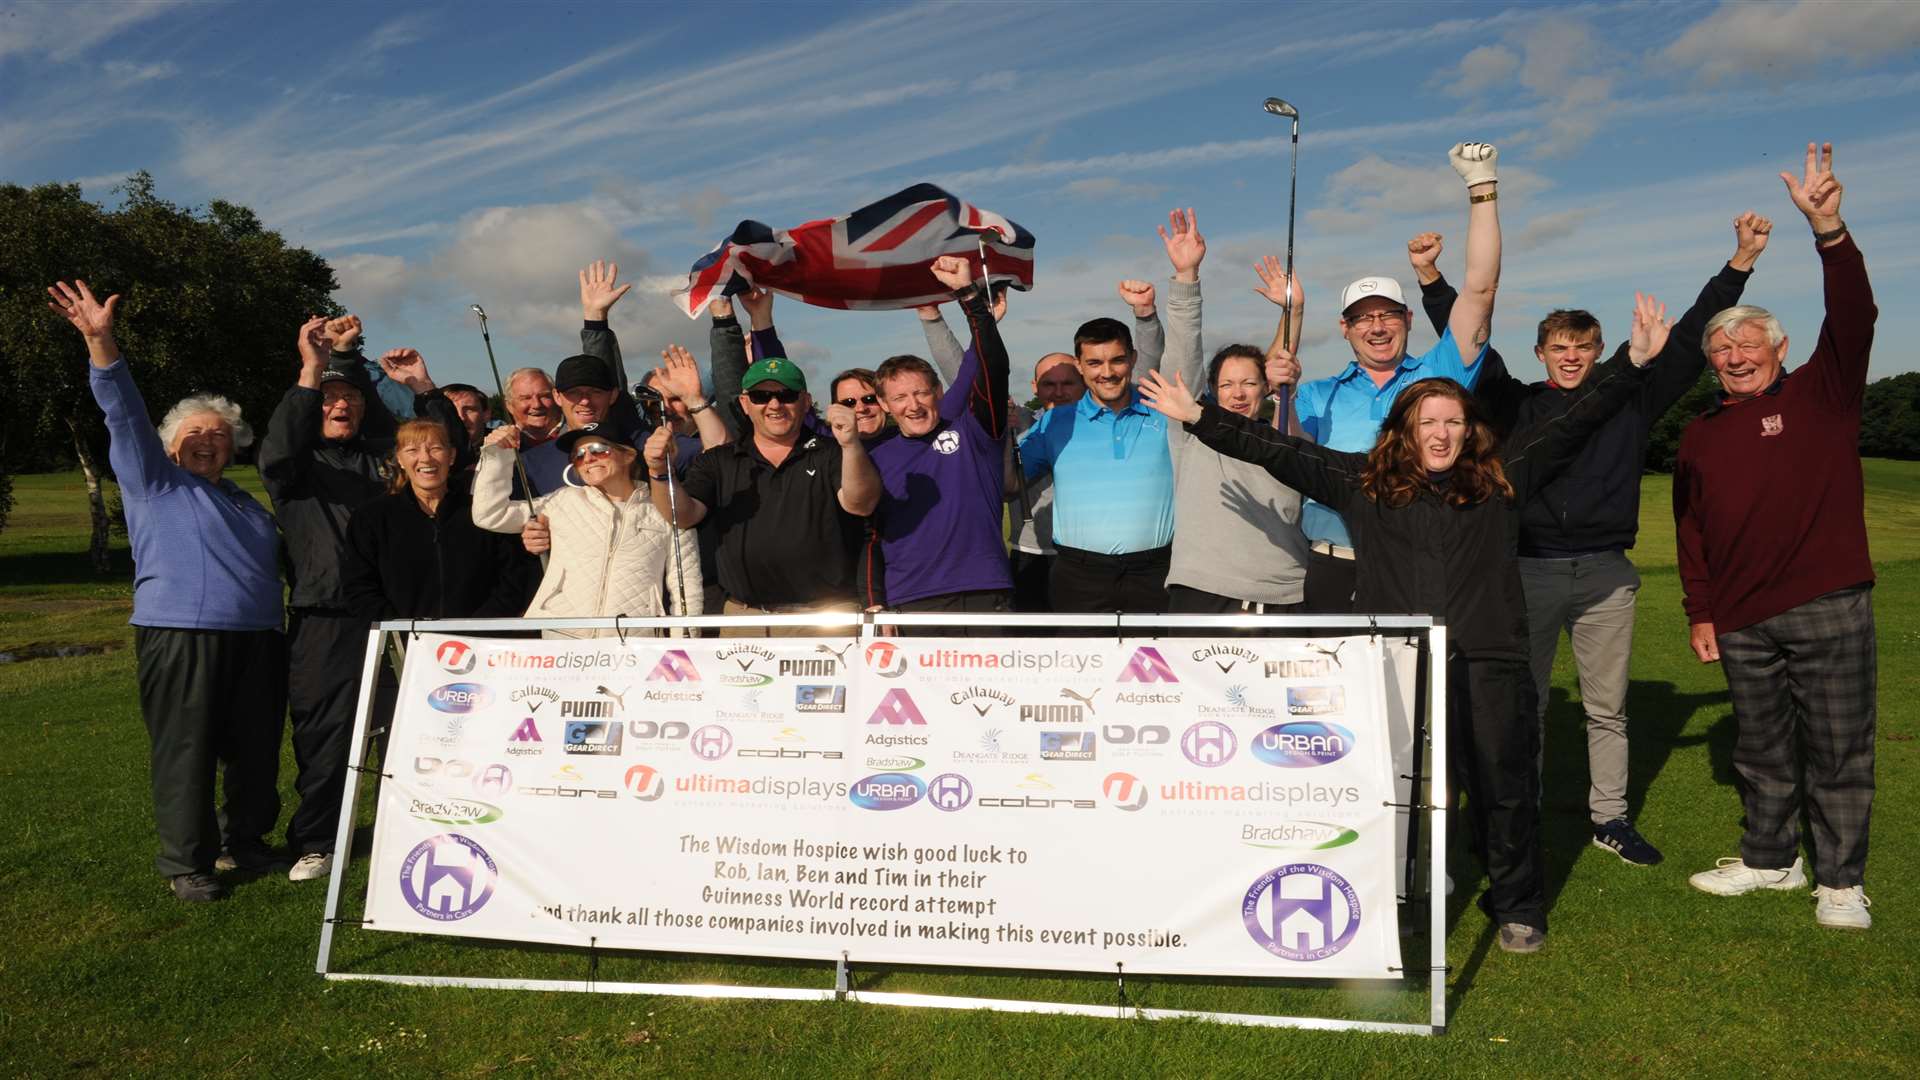 The team, volunteers and supporters celebrate their success